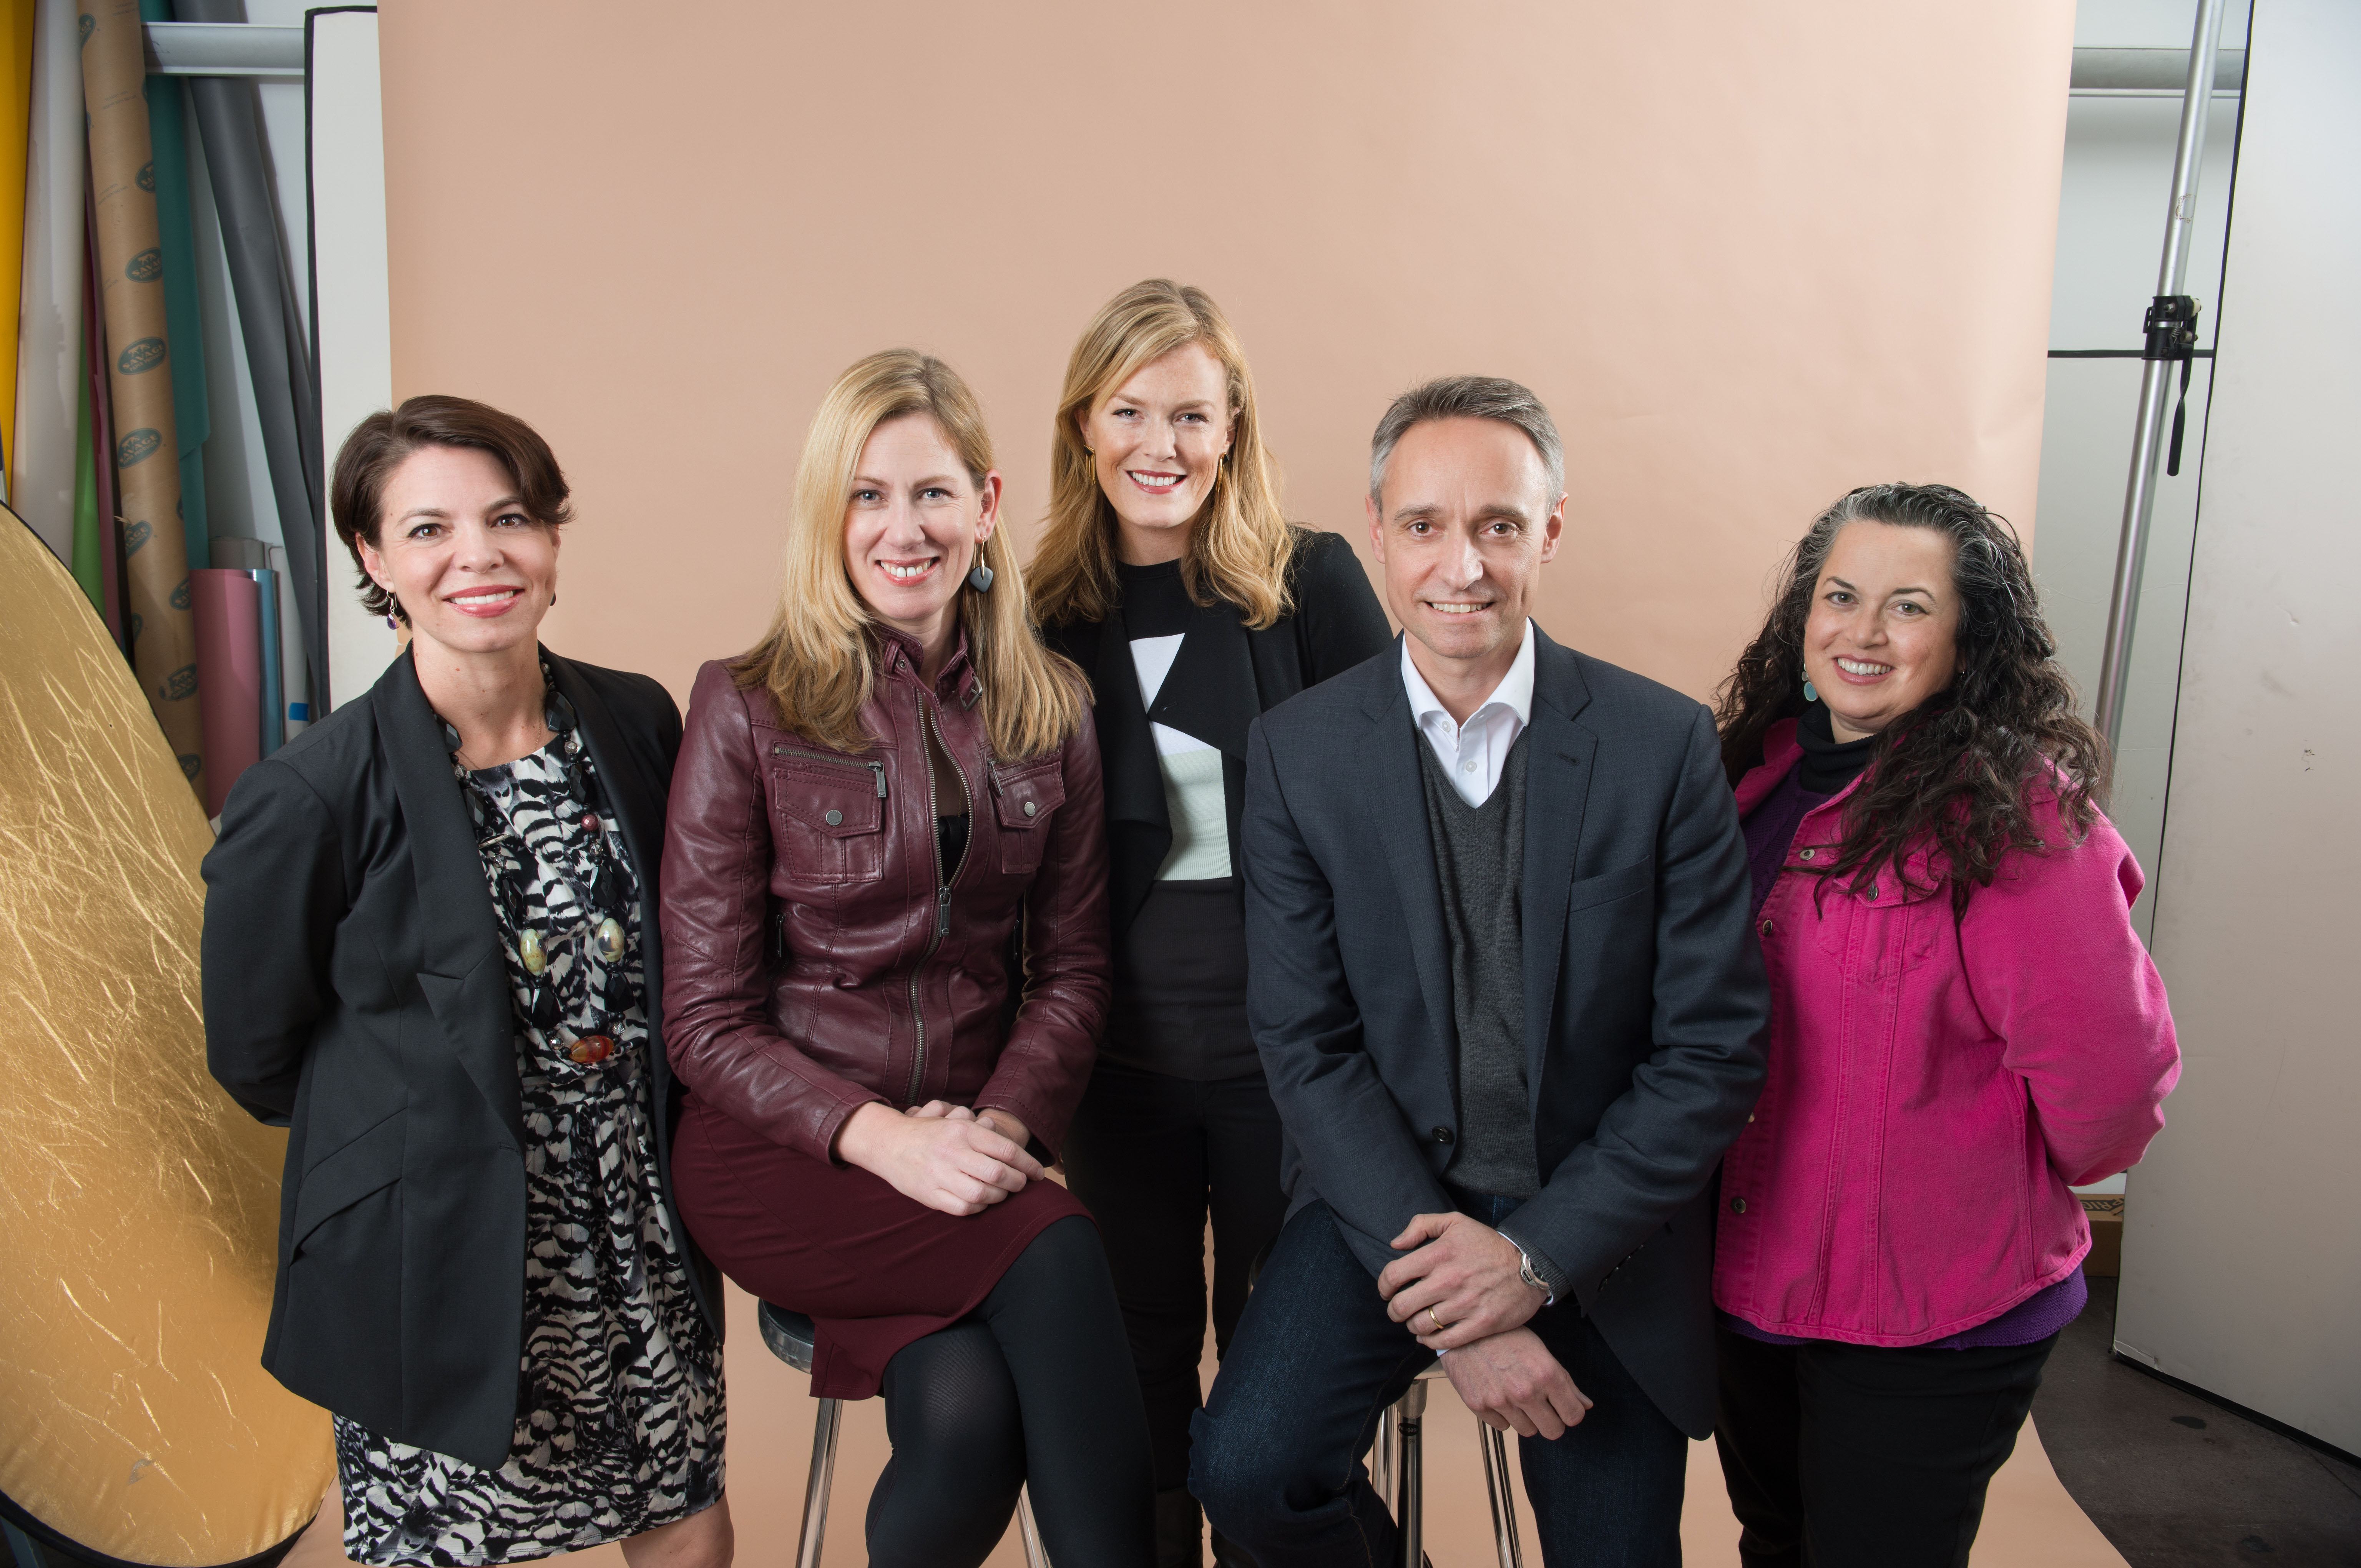 SheKnows Media CEO Philippe Guelton and CRO Samantha Skey (center) pose with BlogHer co-founders (l-r), Jory Des Jardins, Lisa Stone, and Elisa Camahort Page.